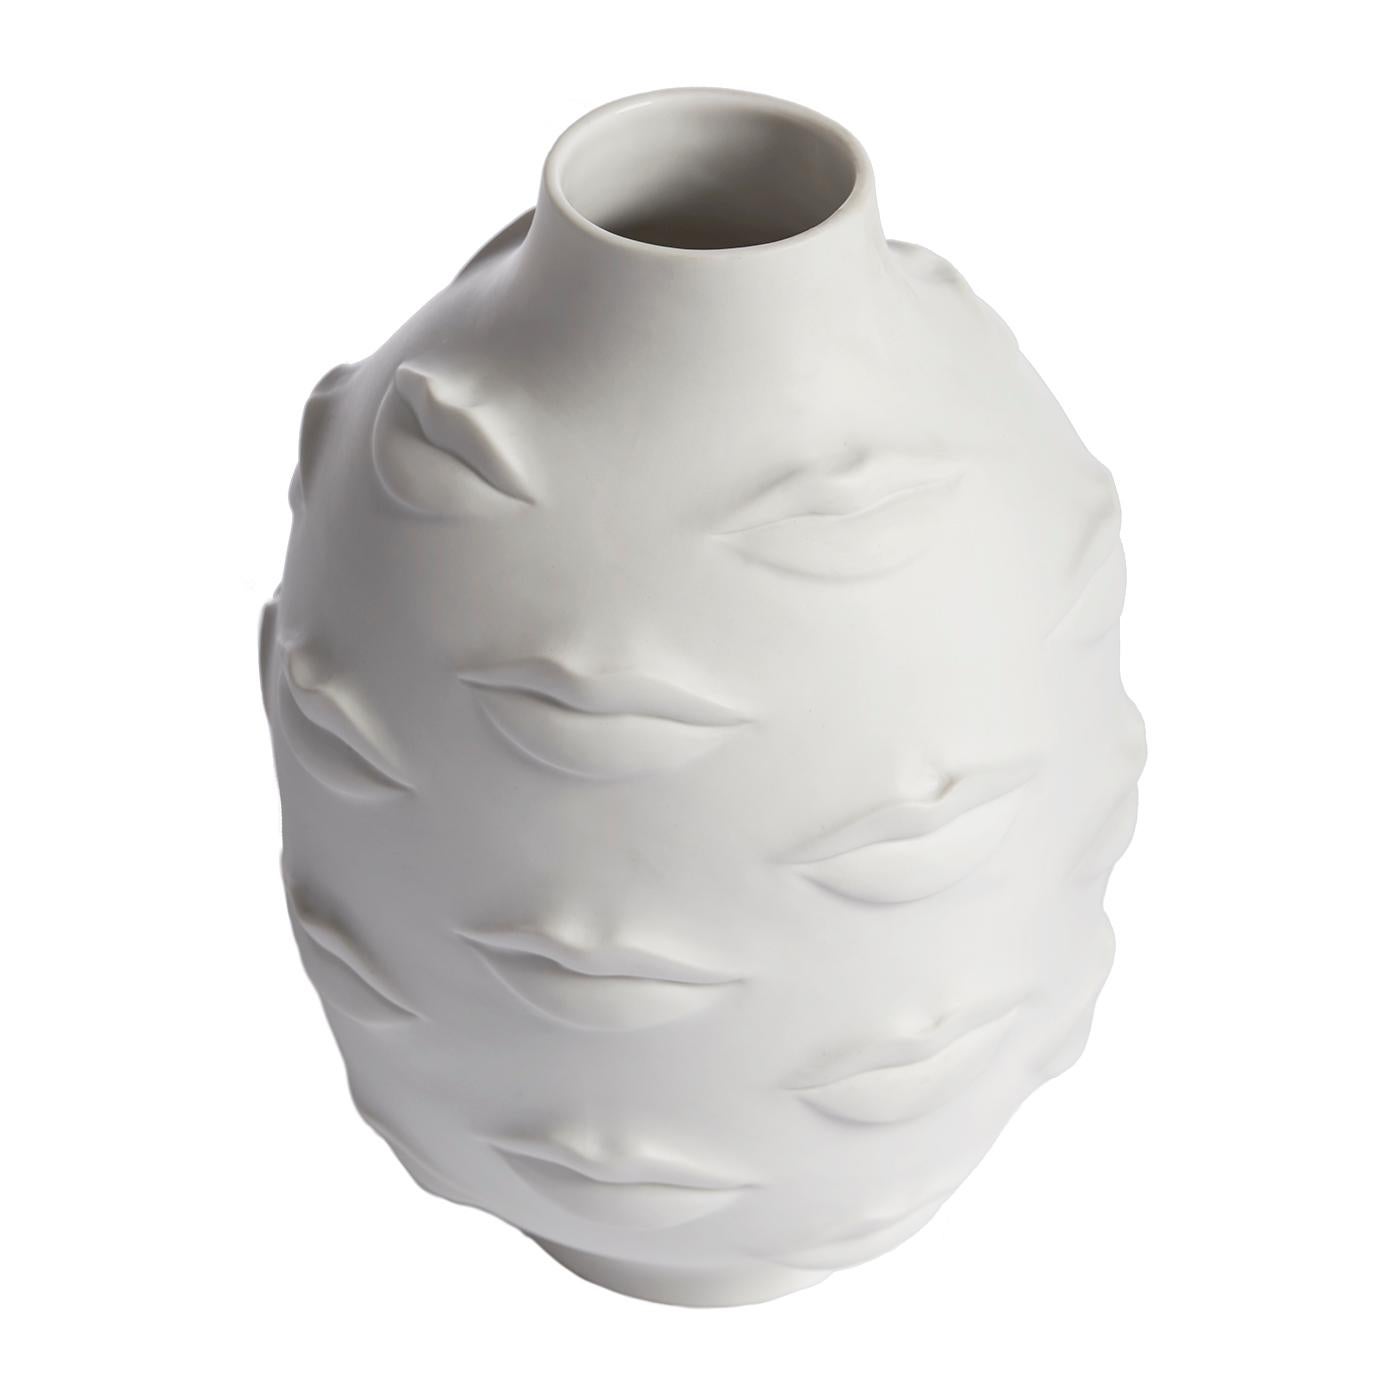 Conversation piece. An expressive collection of moody mouths wrap a vessel crafted from high-fired unglazed porcelain exterior with a glazed interior. A kiss of cool for your table, mantel, or shelf. Inspired by Gala, wife and muse of Salvador